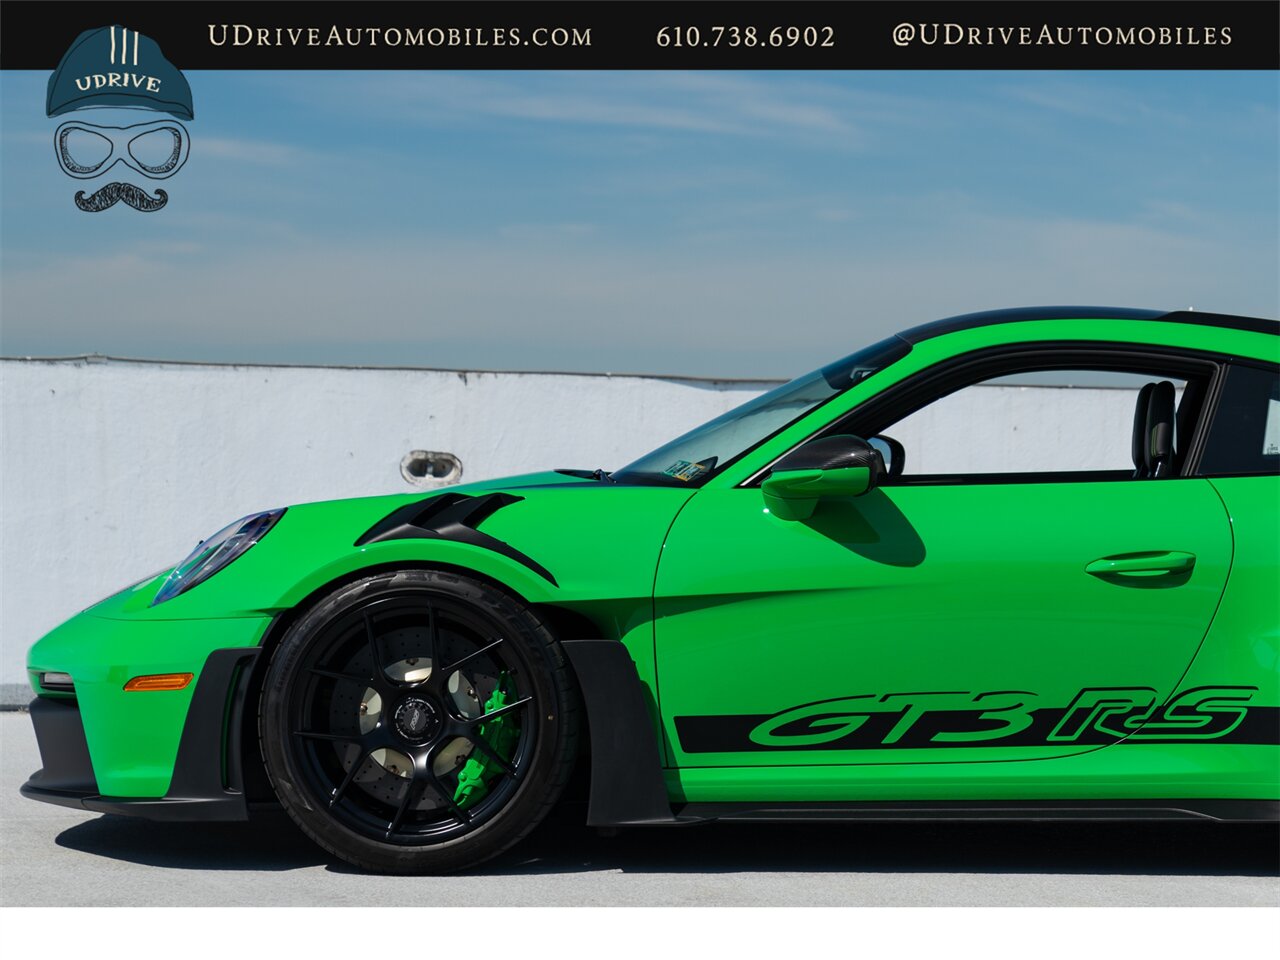 2023 Porsche 911 GT3 RS  Weissach Pkg FAL Full Body PPF $43k in Extras - Photo 10 - West Chester, PA 19382